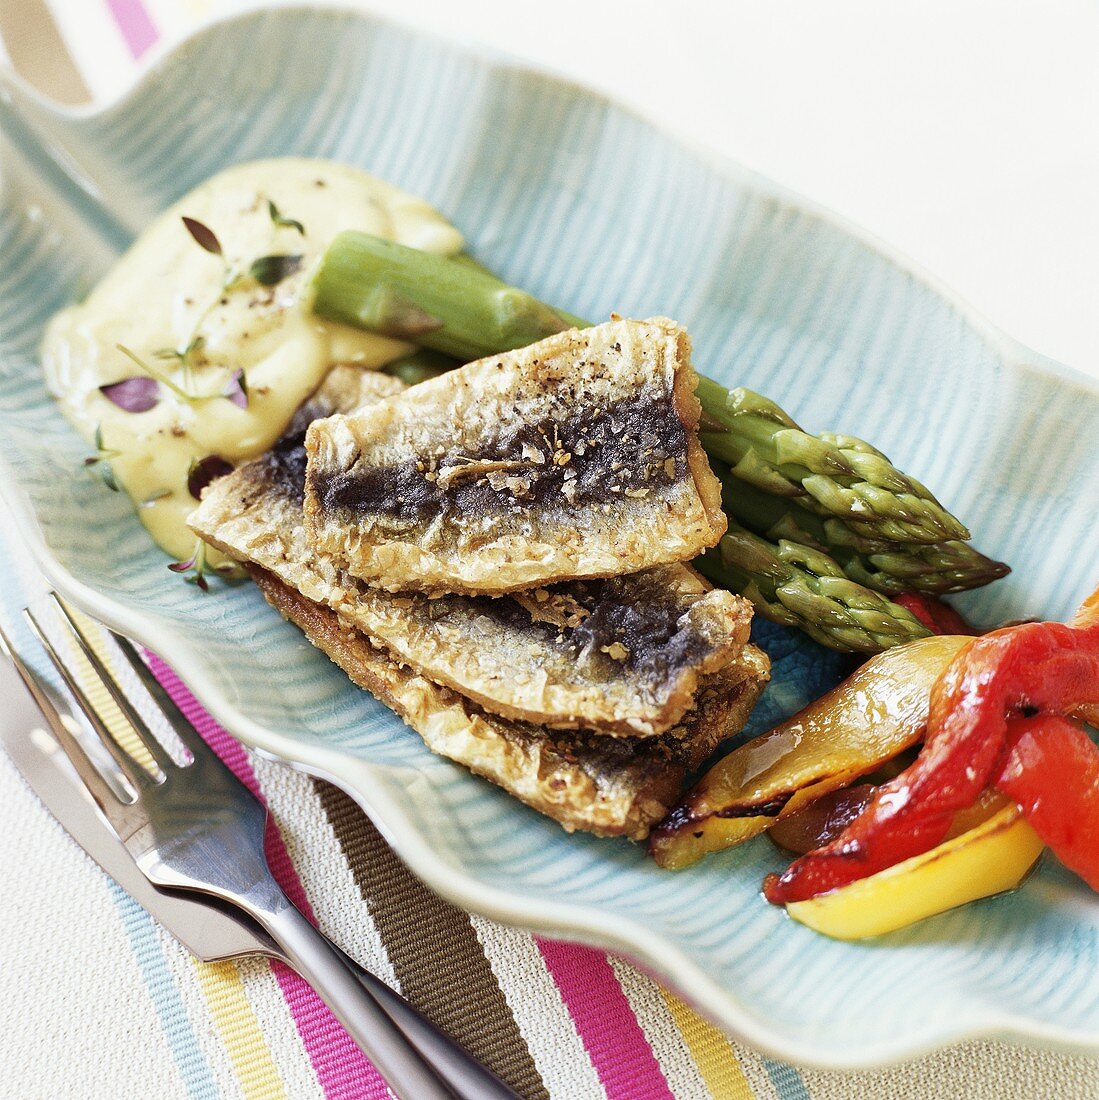 Herring with herb stuffing, asparagus, peppers and aioli